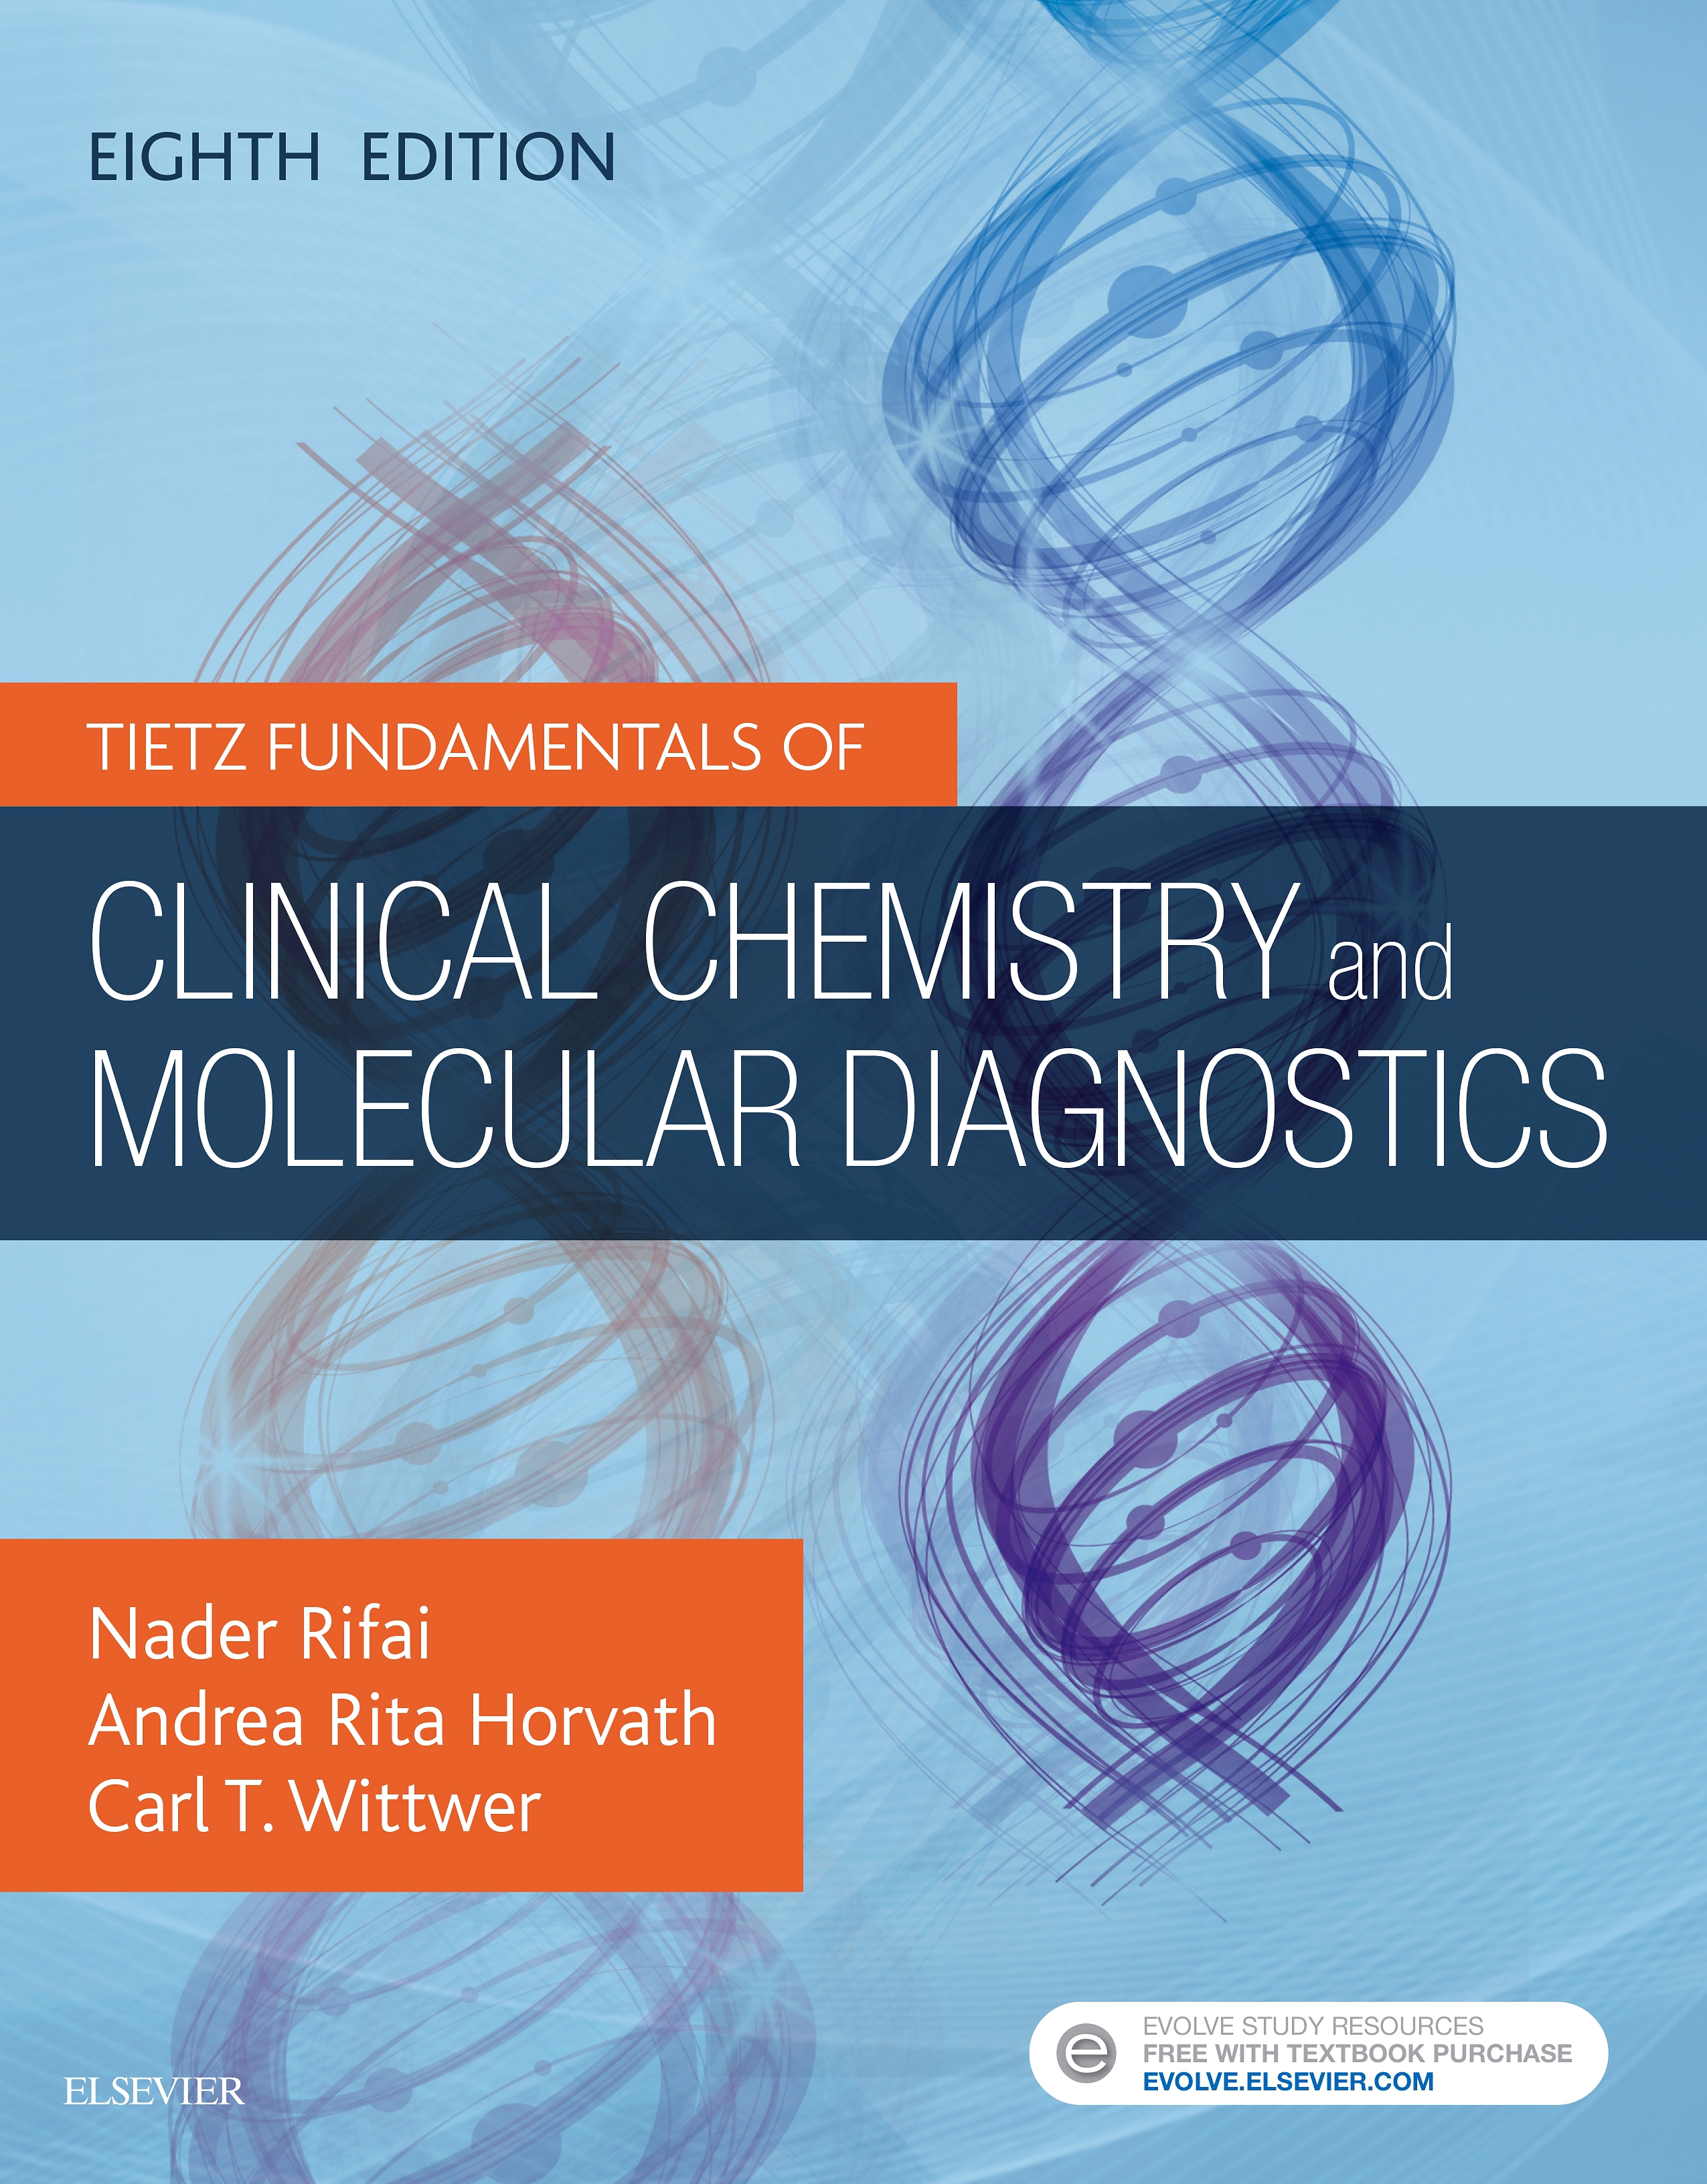 Evolve Resources for Tietz Fundamentals of Clinical Chemistry and Molecular Diagnostics, 8th